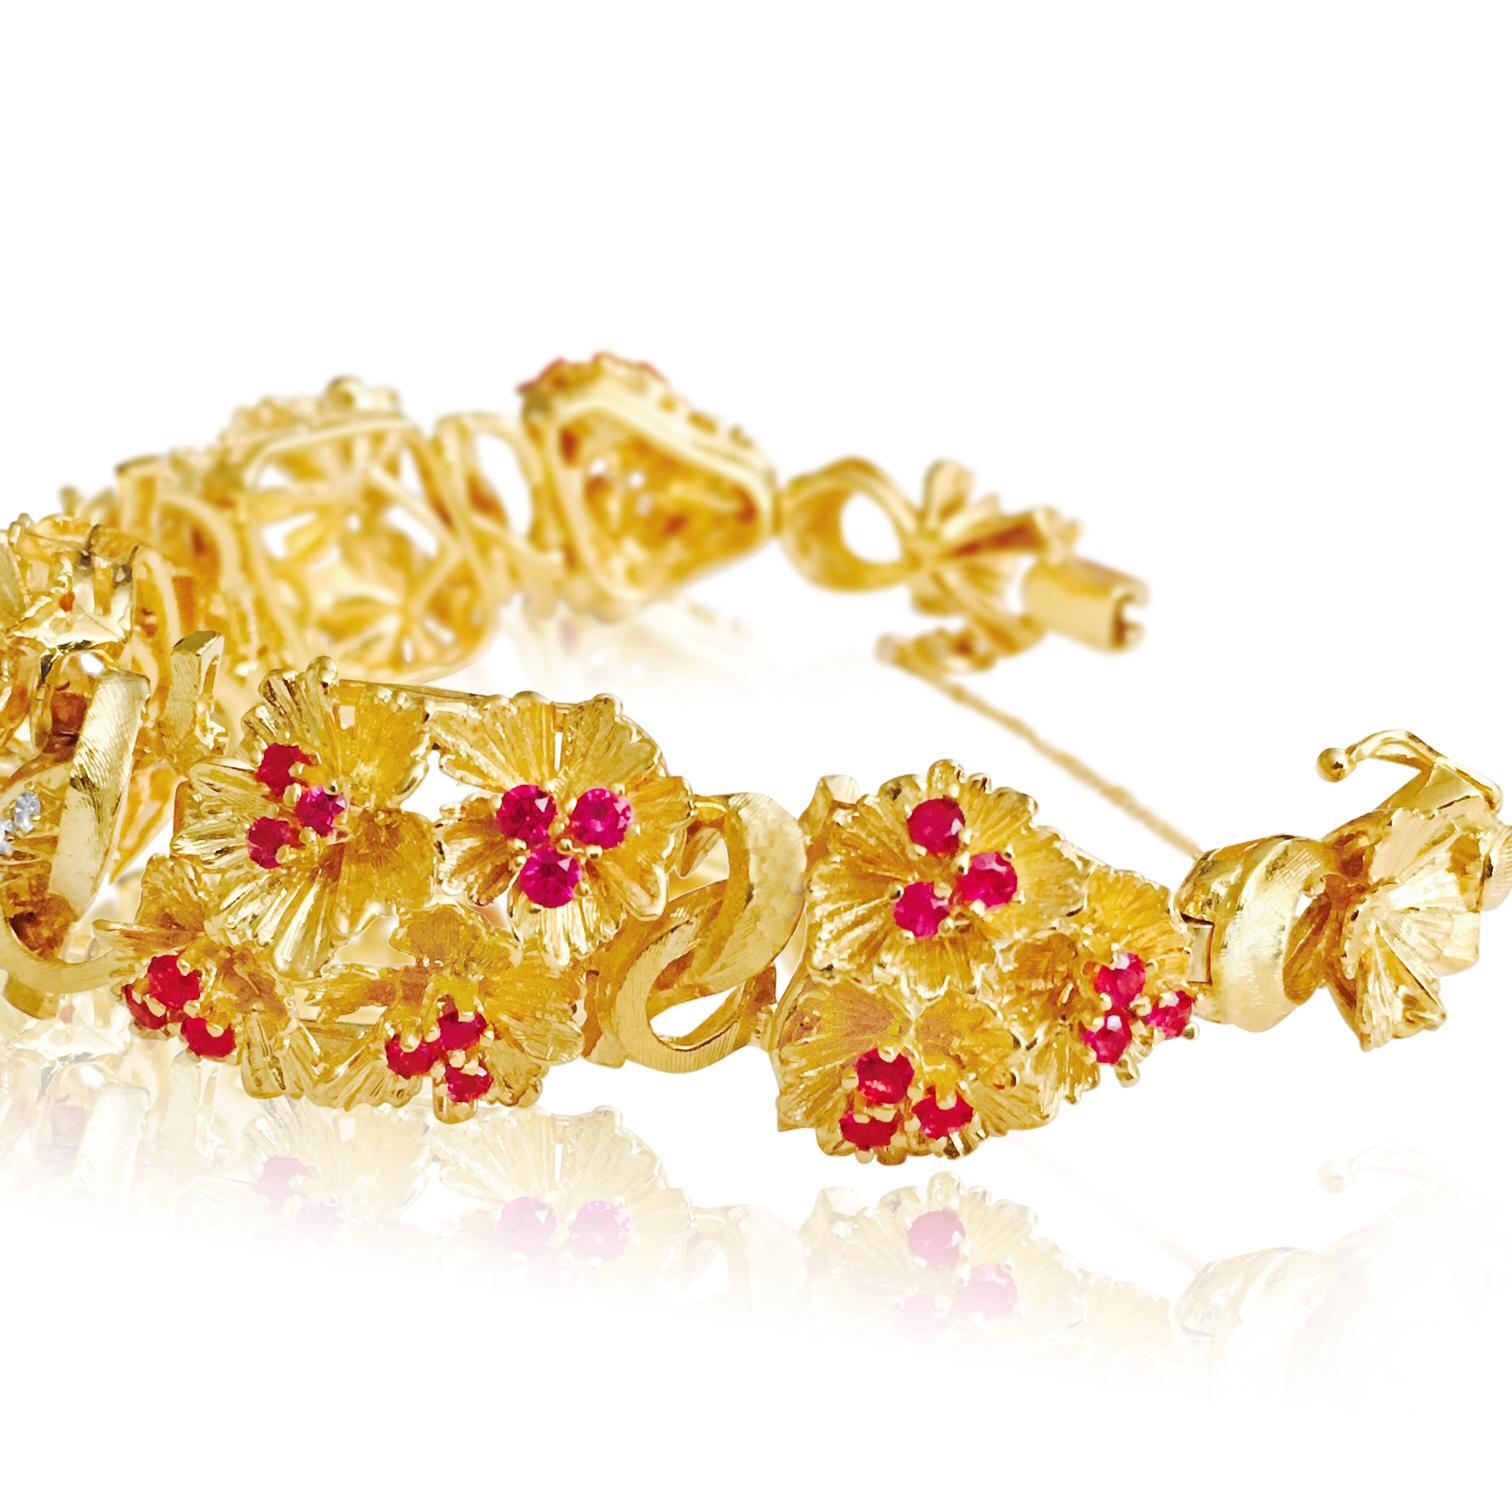 Metal: 18K Yellow Gold. 
6.00 carat Burma ruby, round cut.
1.00 Carat Diamonds. VVS clarity and F-G color. Round brilliant cut. 
All stones set in prongs setting. 
Womens diamond, ruby and gold bracelet. 